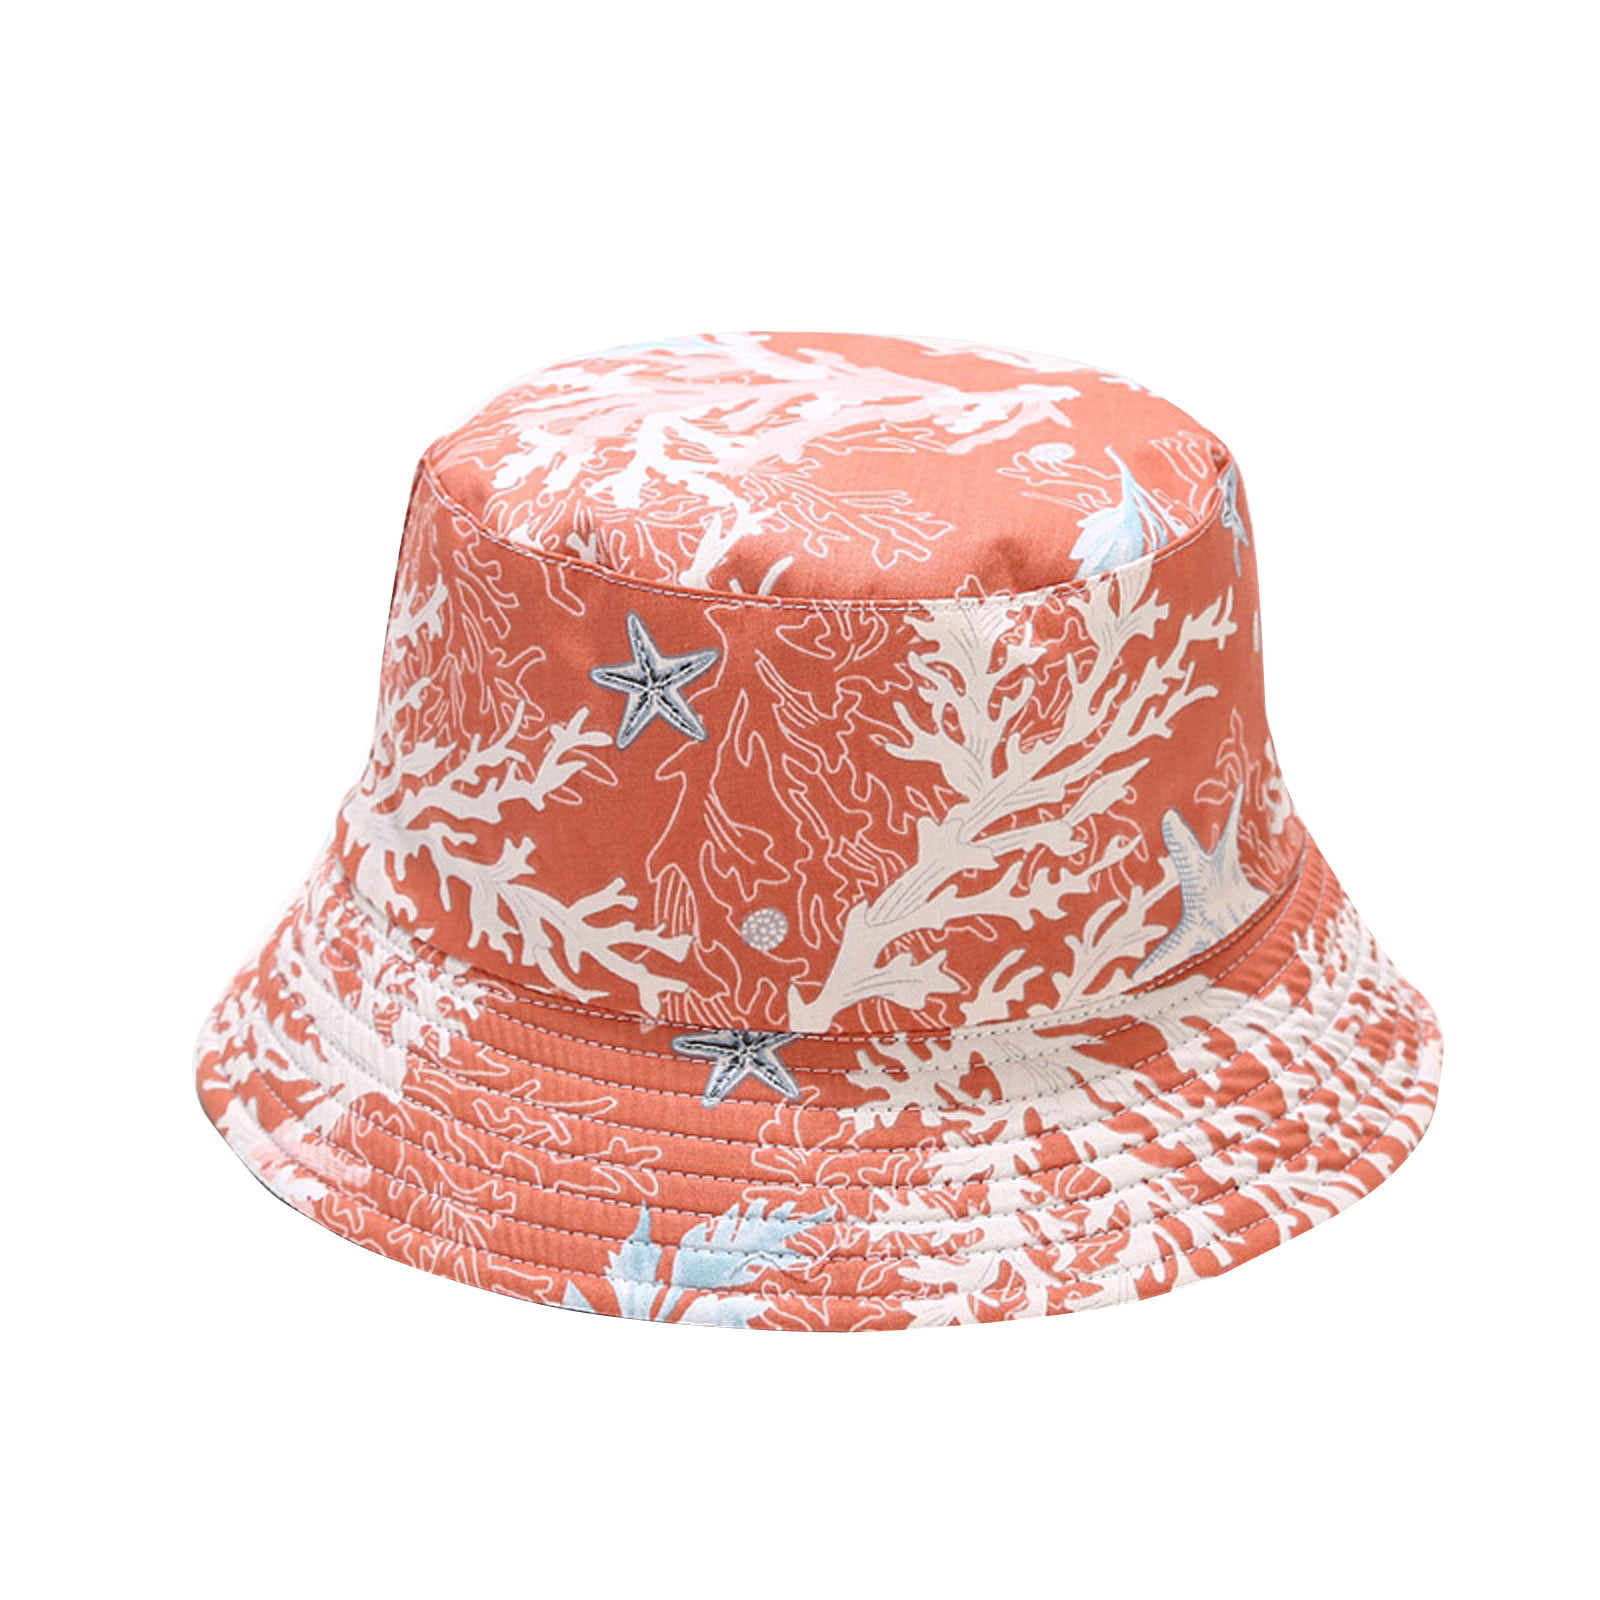 Bucket Hats Skull Flowers Roses Wide Brim Beach Sun Hat for Women and Men,for Sun Protective